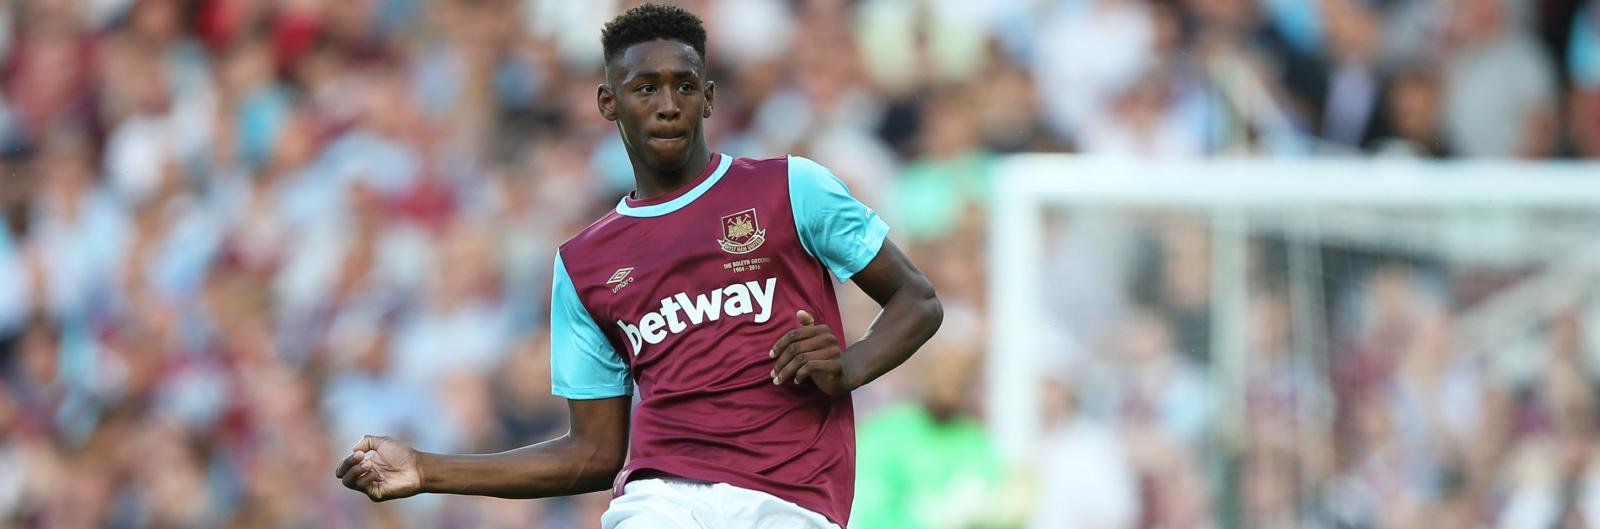 Manchester United offer £10m for Liverpool target and West Ham United youngster